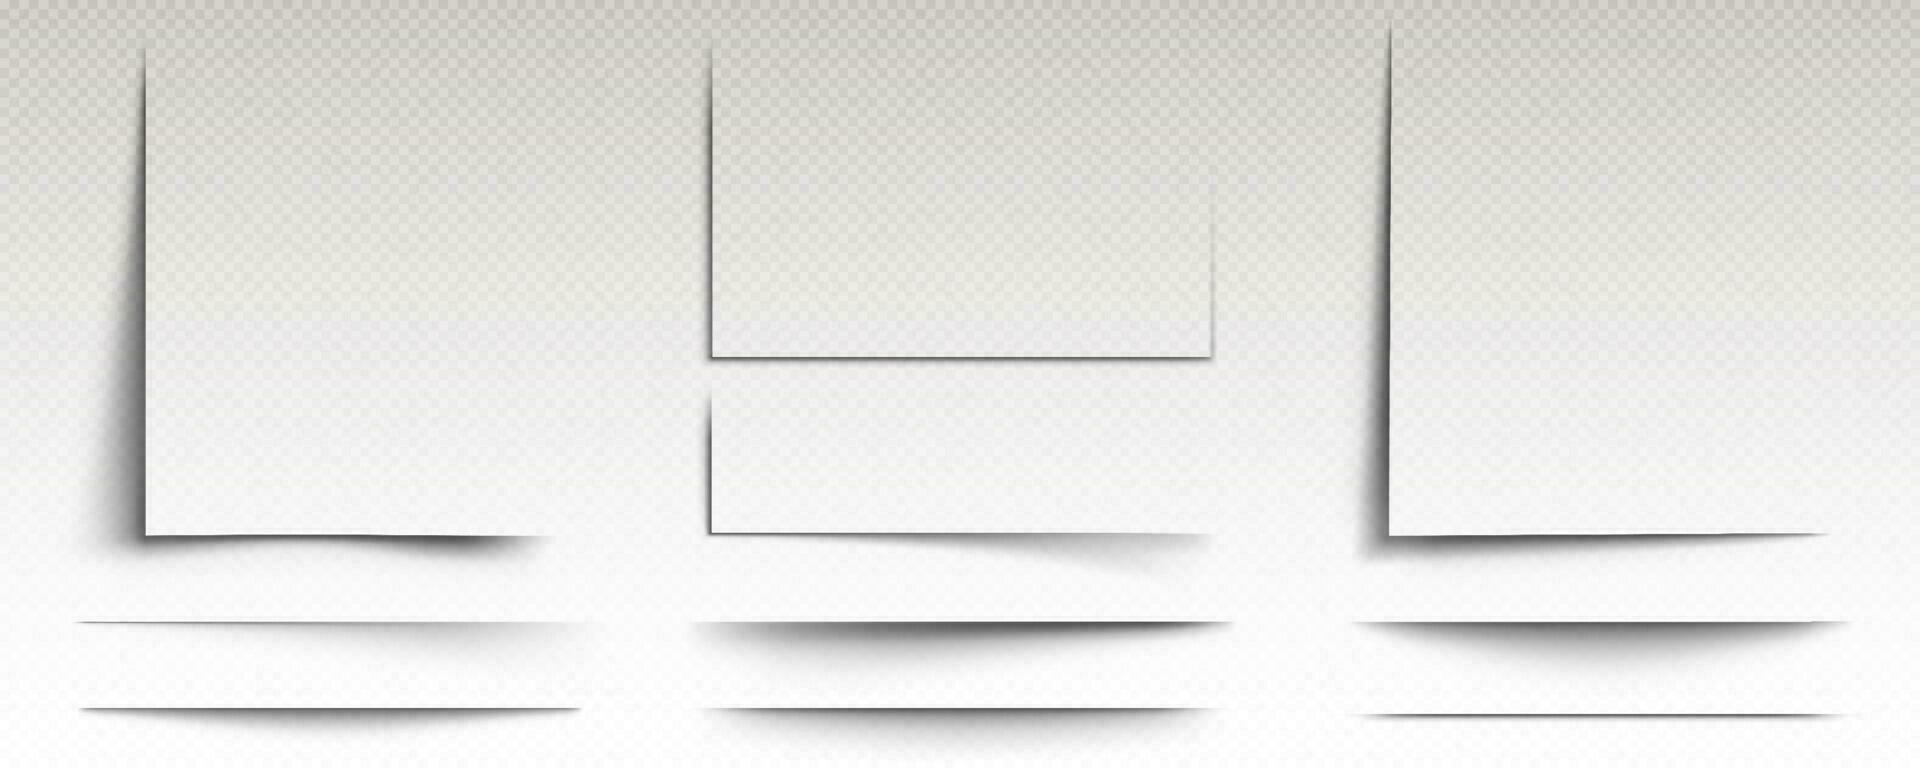 Square shadow box frame vector effect template